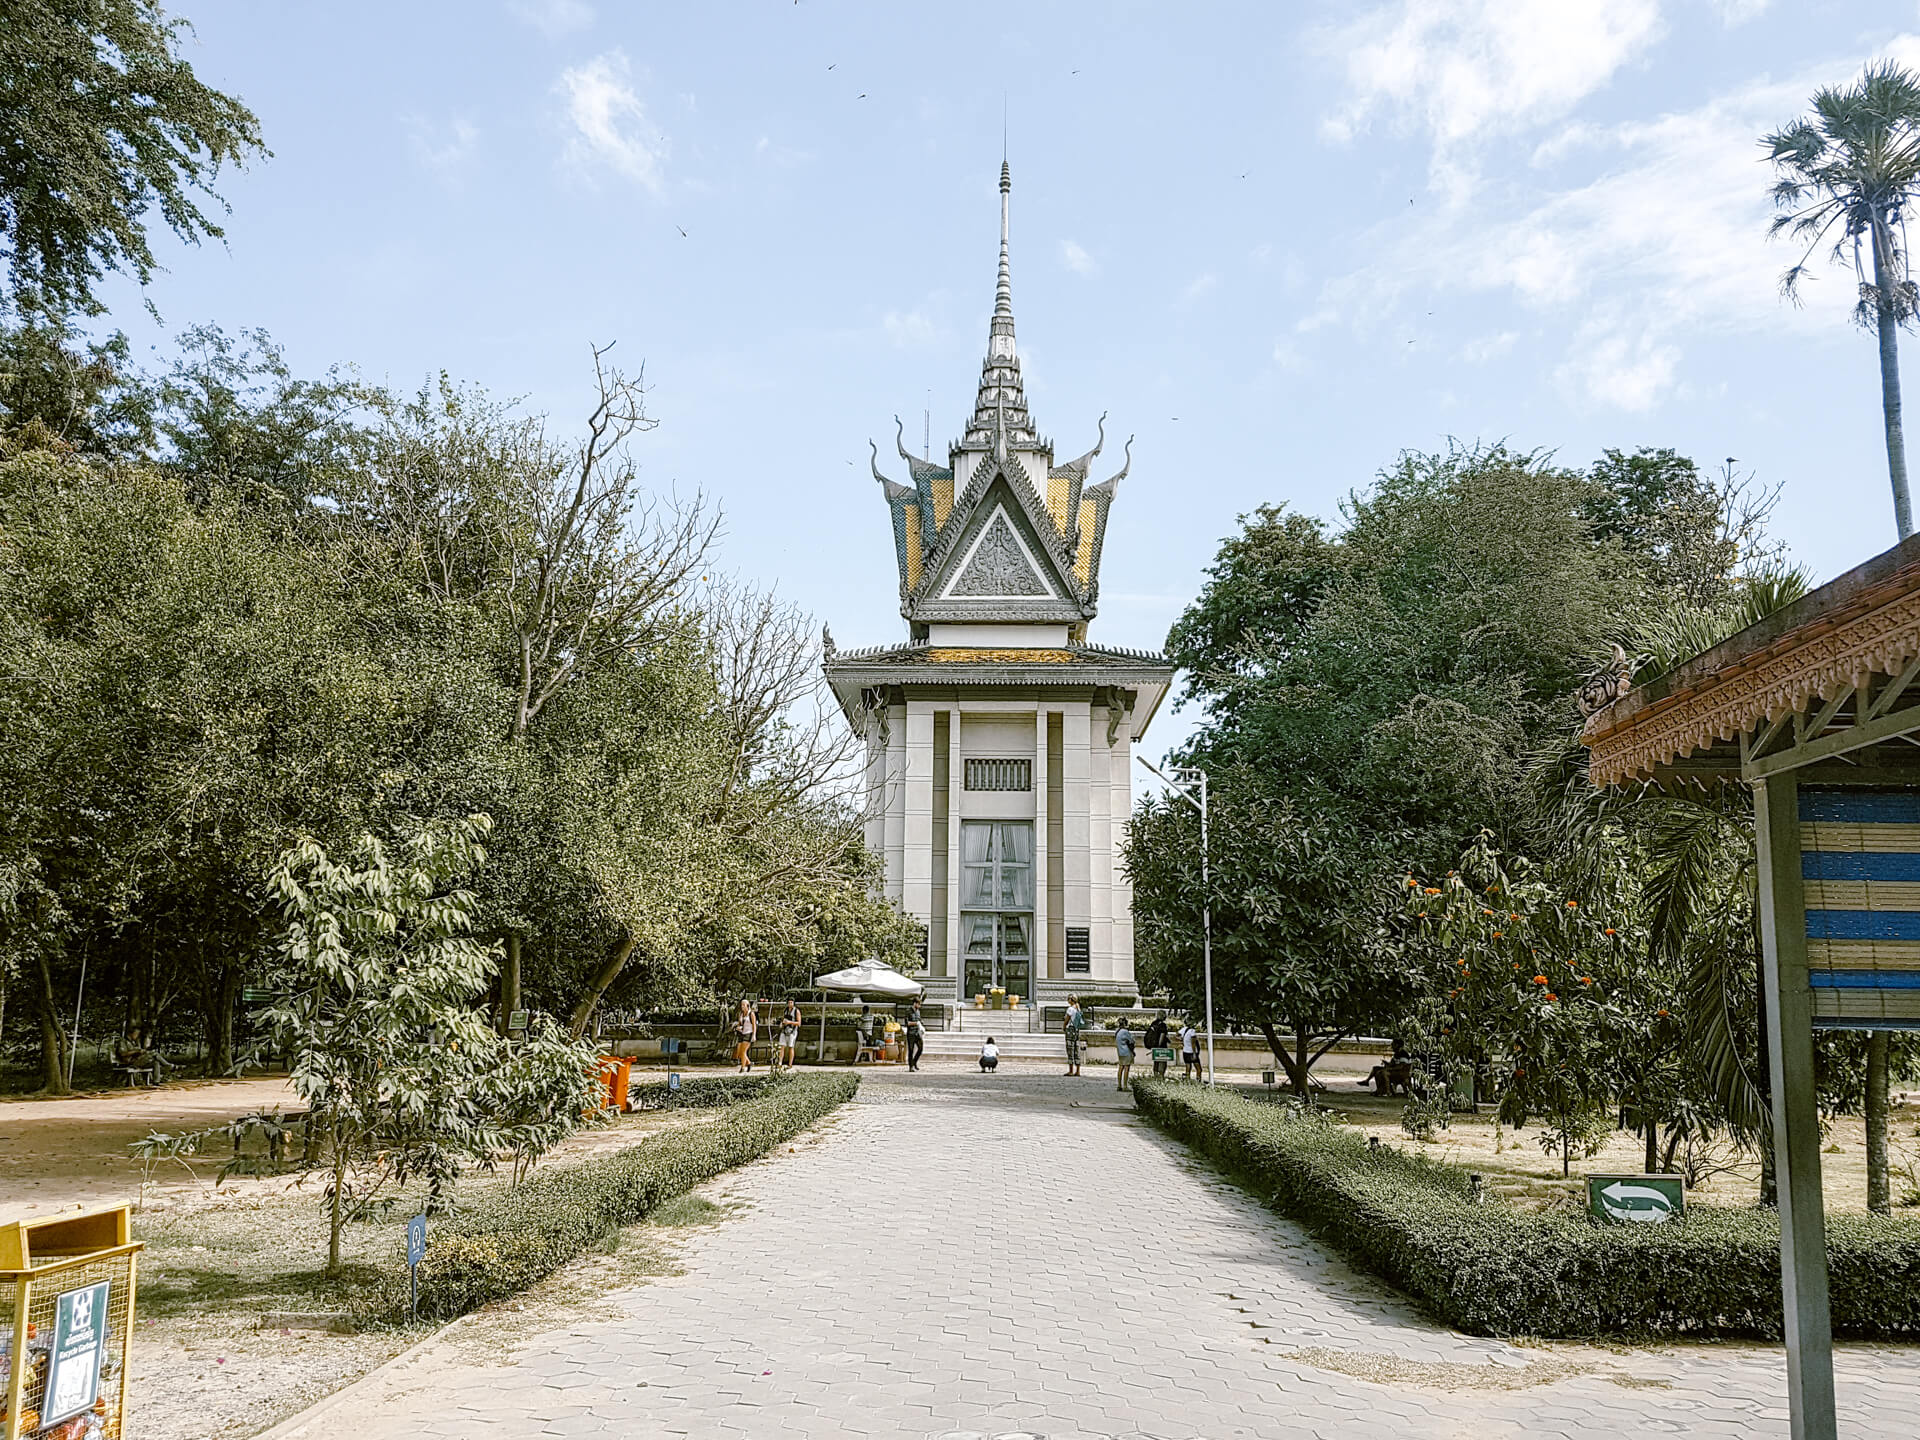 All You Need To Know About S21 Prison & The Killing Fields Of Phnom Penh